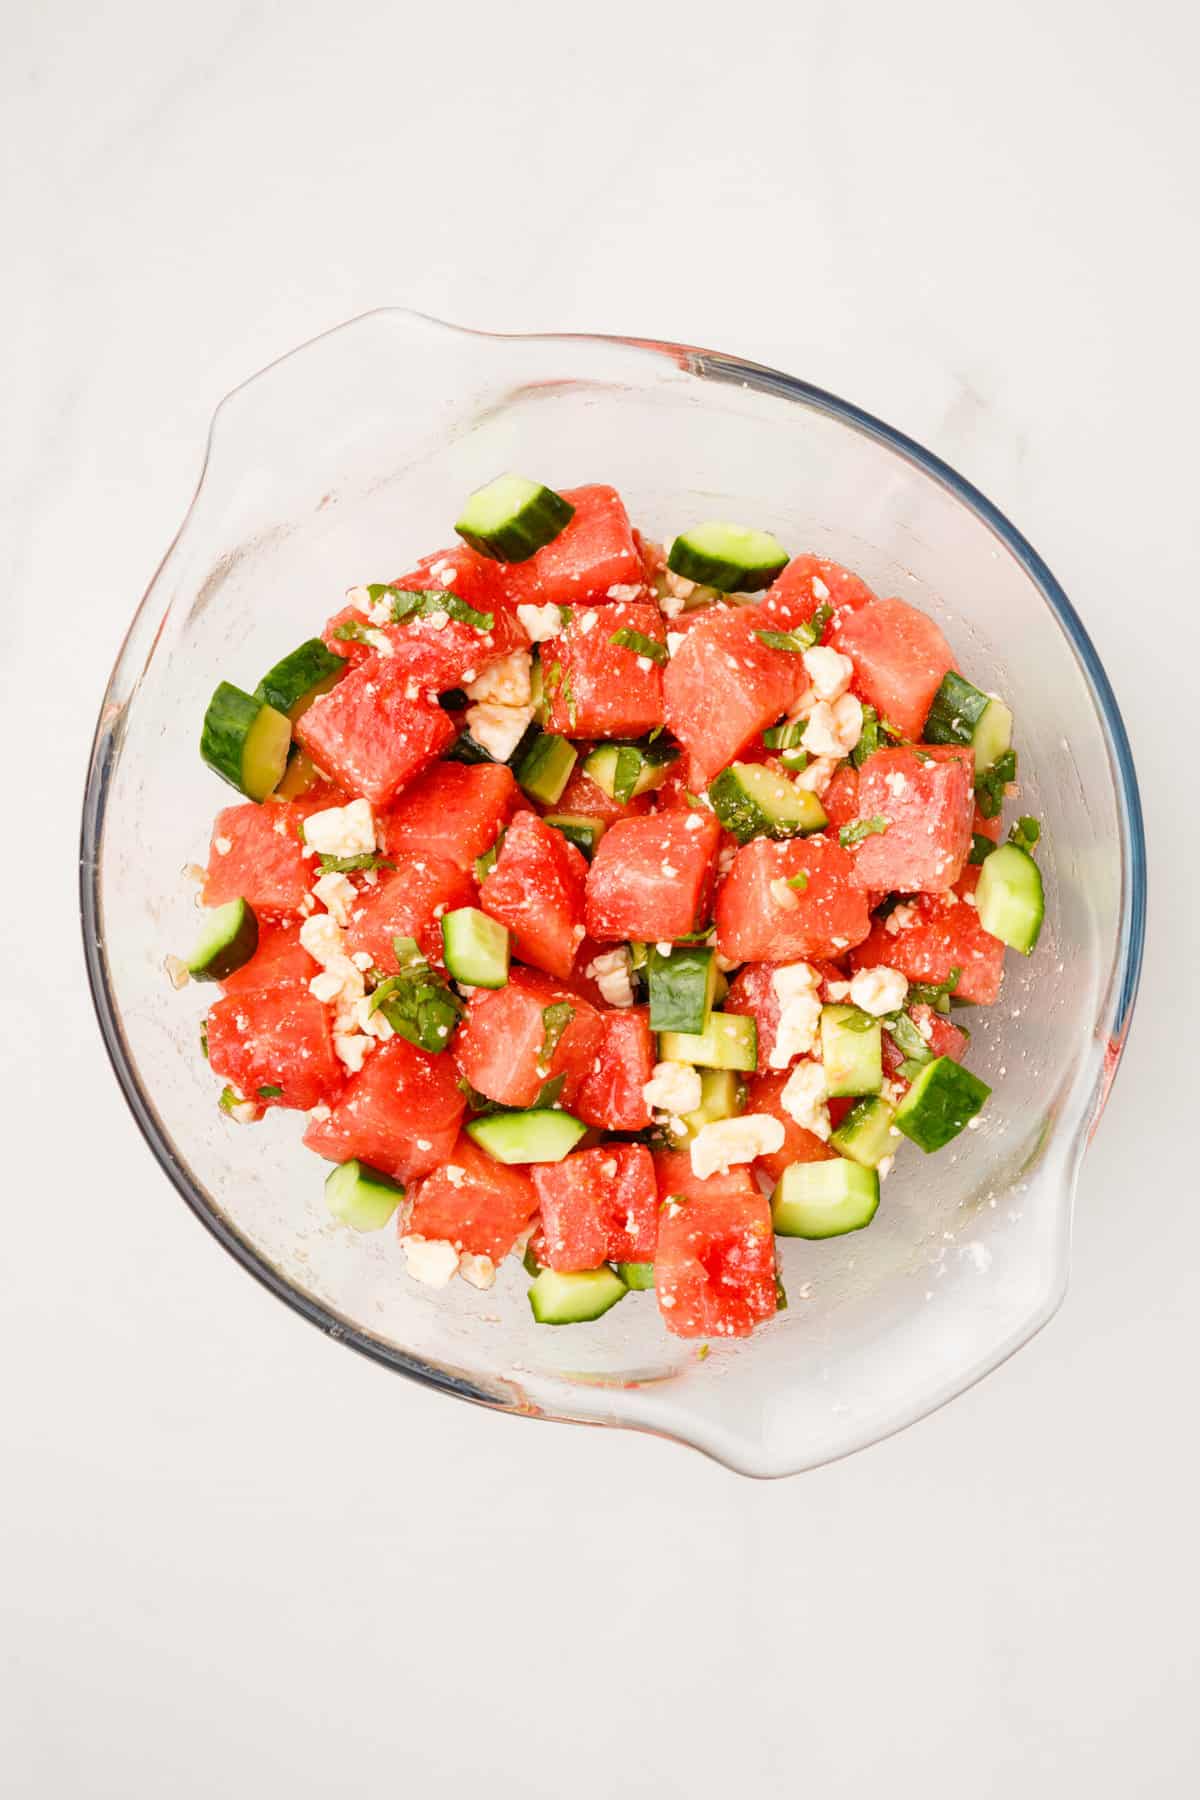 cubed watermelon, cut mint, cucumbers and feta cheese mixed in a large glass bowl